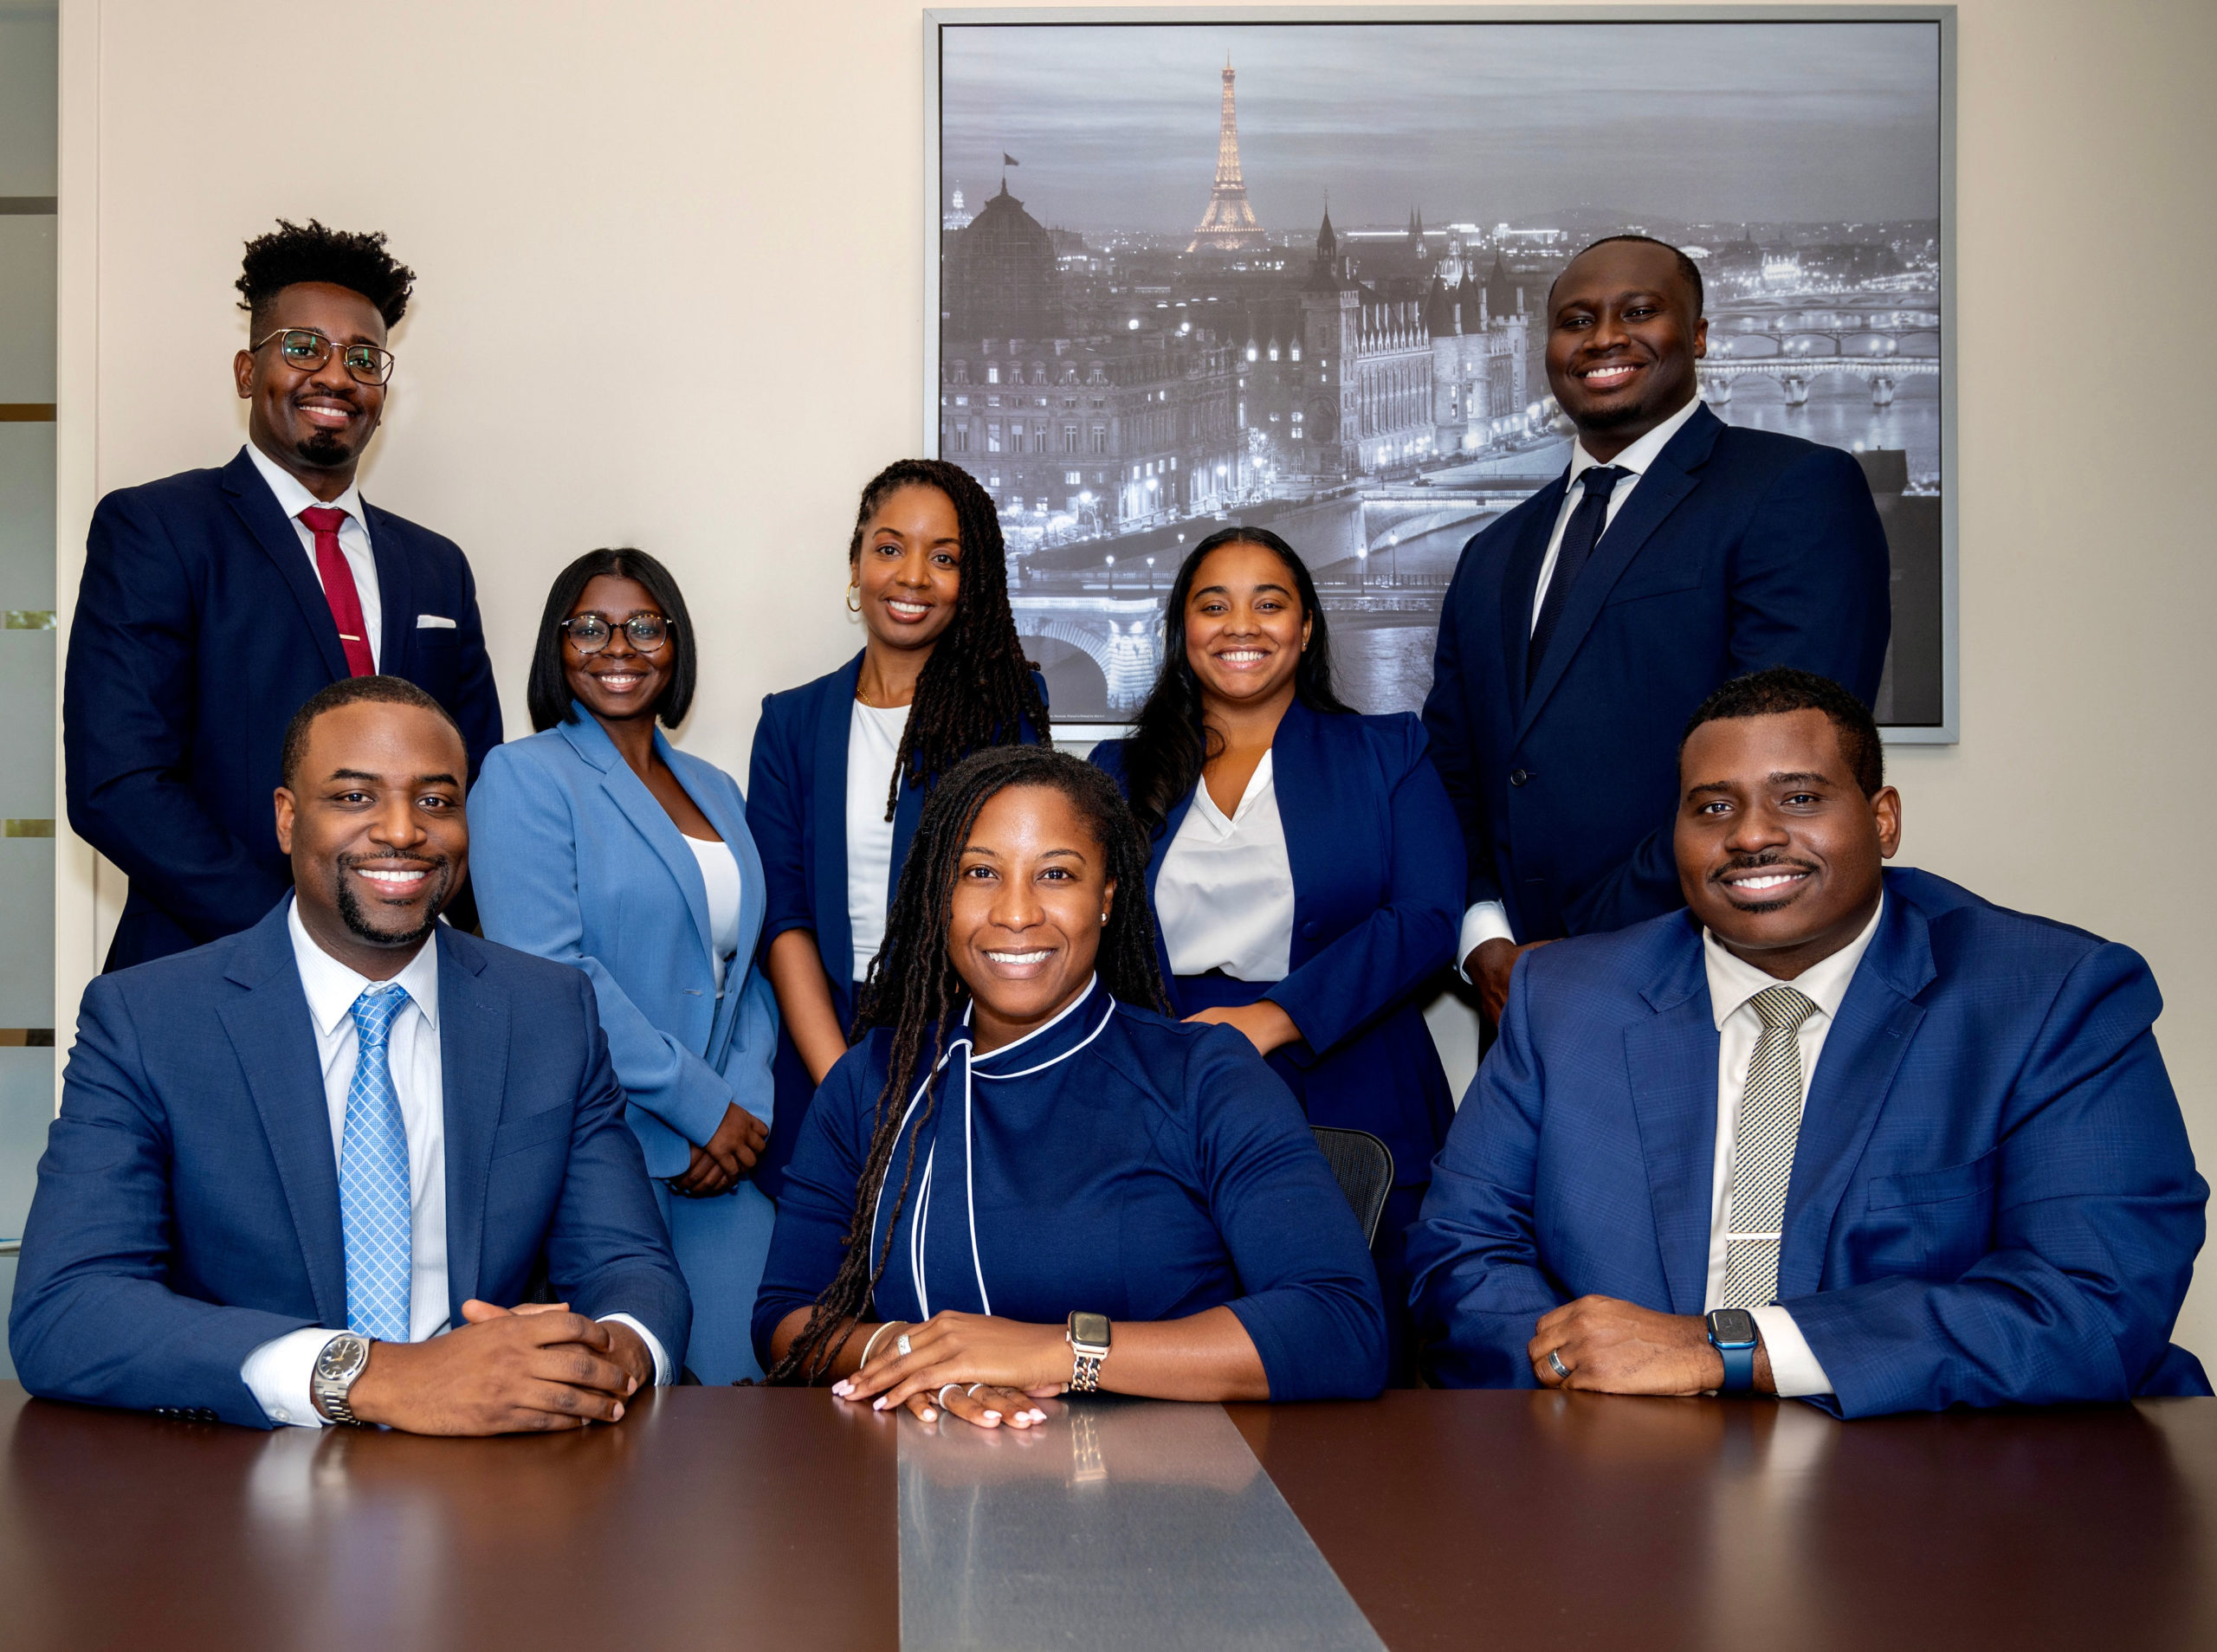 The 35th president of the historic Wilkie D. Ferguson Jr. Bar Association, TerryAnn S. Howell, said that amidst a state and national political climate engulfed in culture wars, her team will have a steady hand.